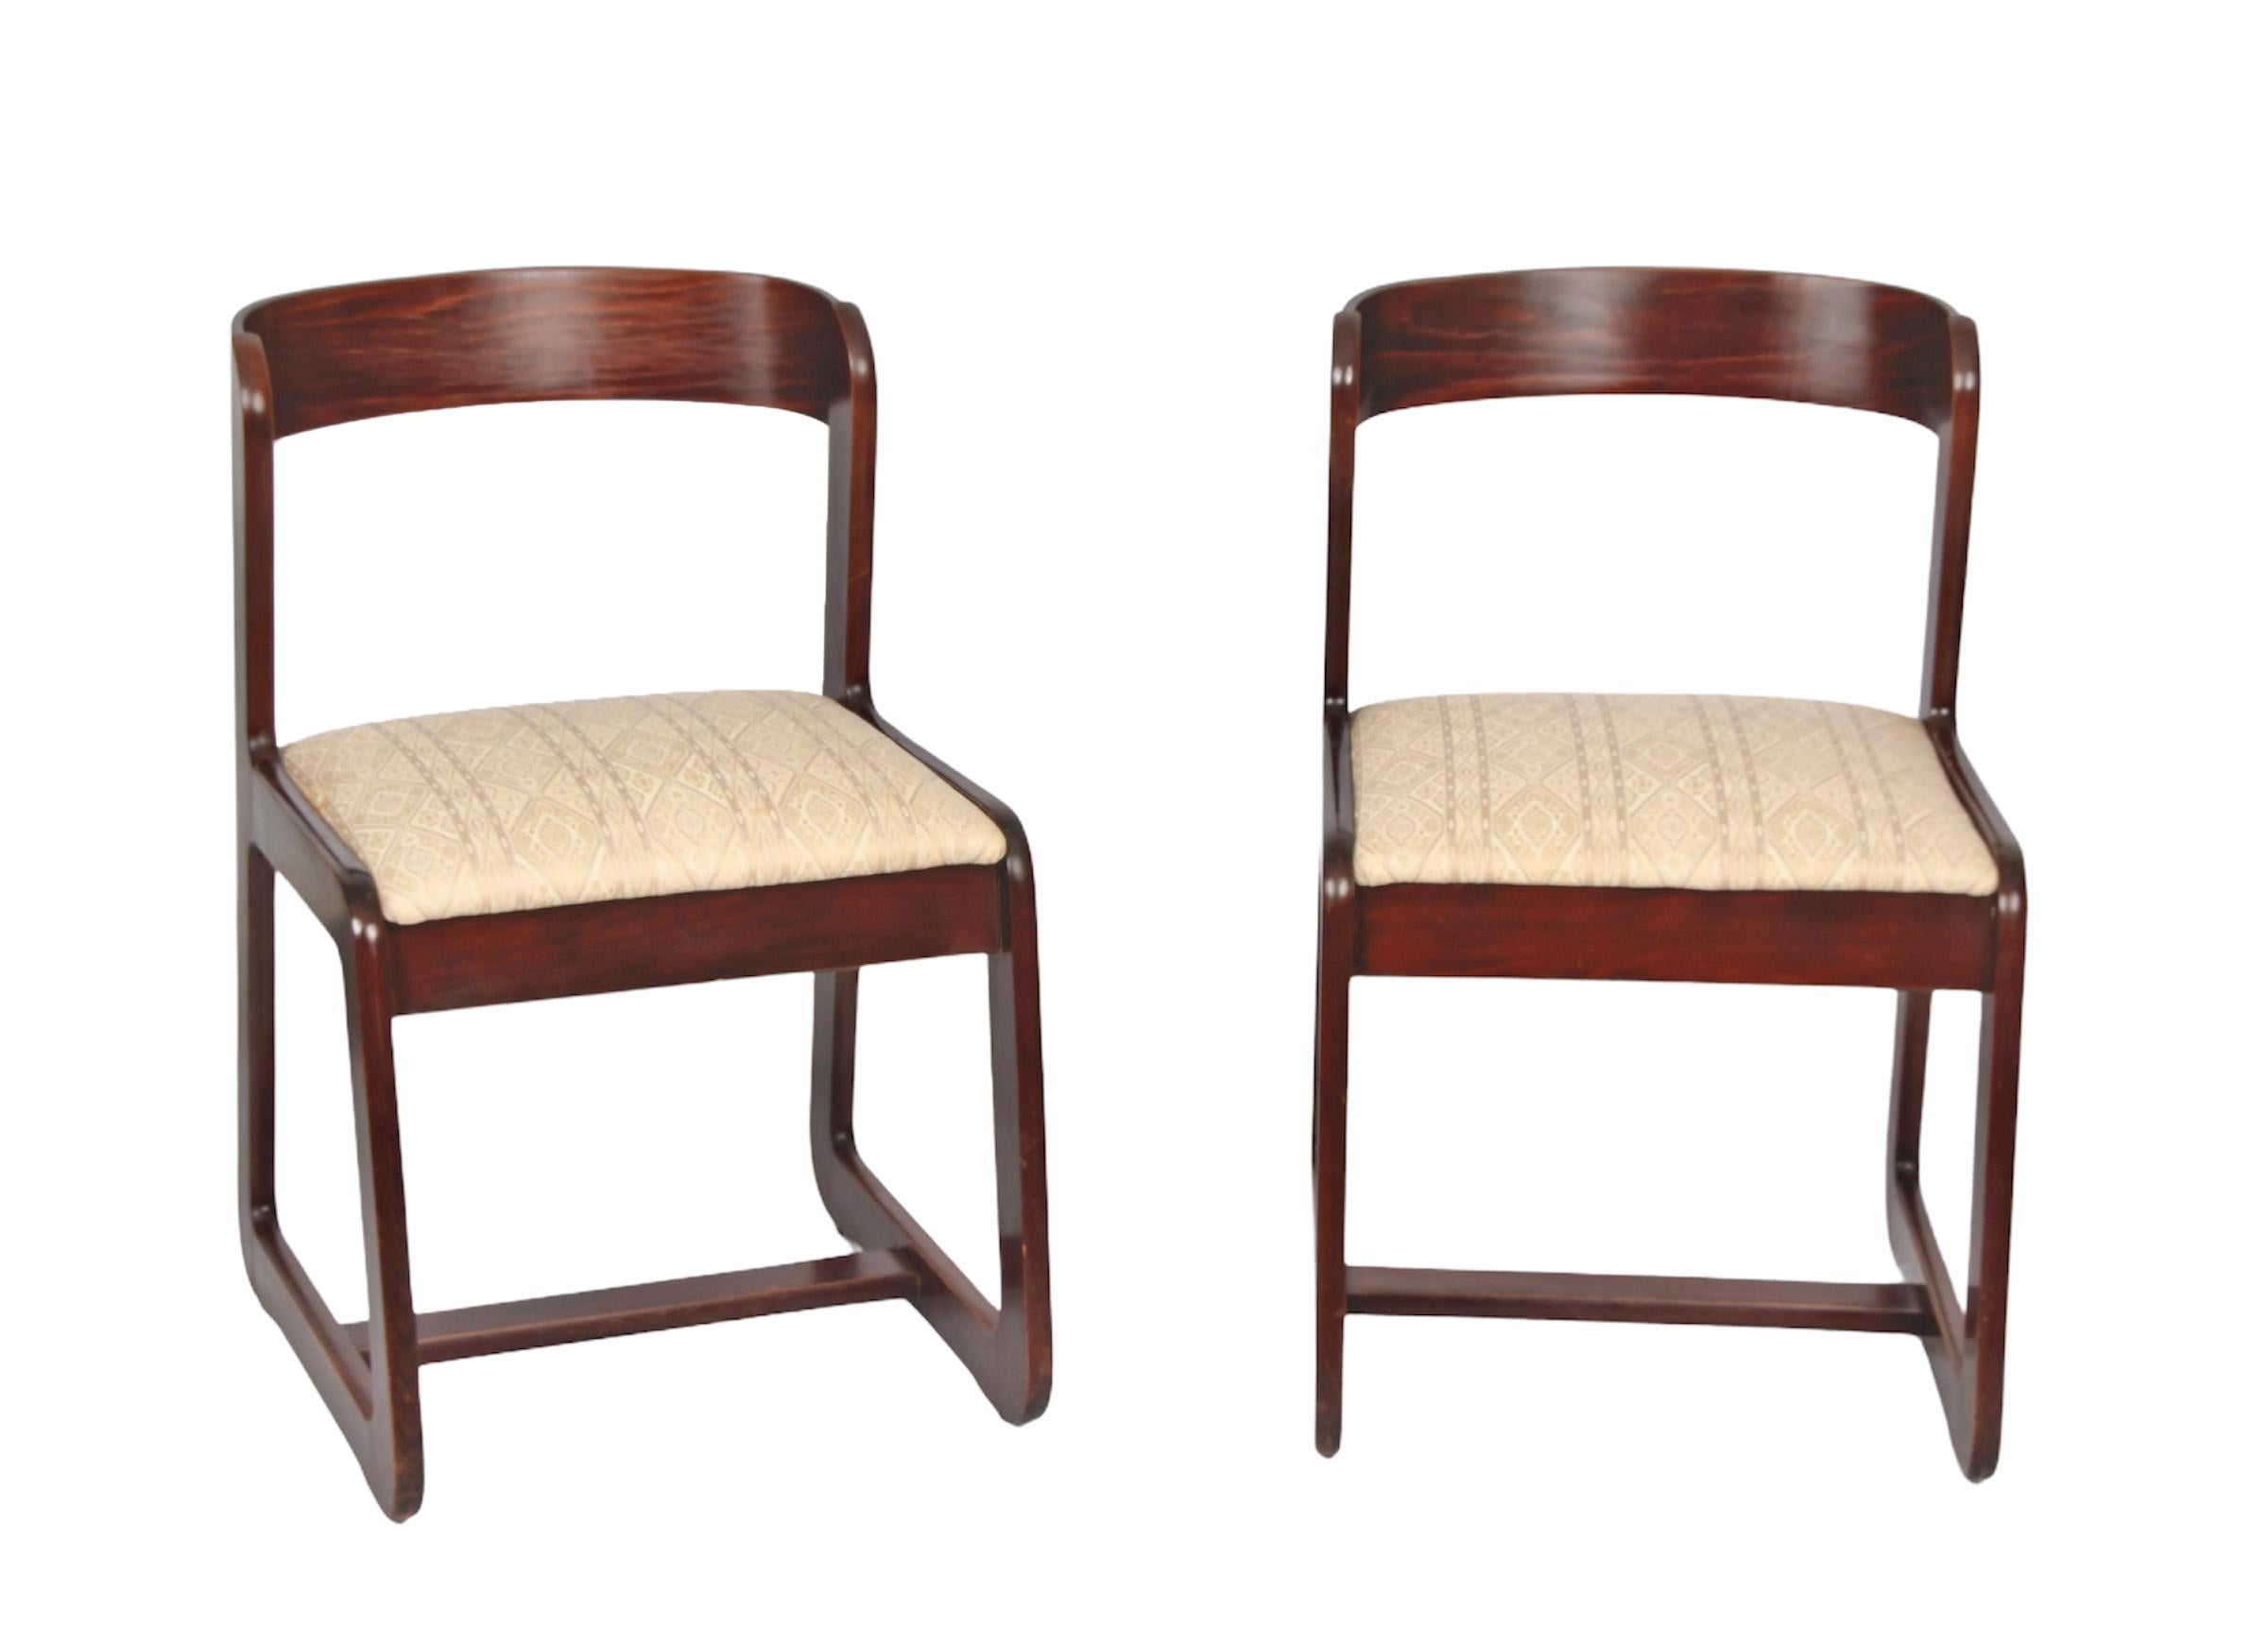 Late 20th Century Willy Rizzo Midcentury Italian Wooden and Fabric Chairs for Mario Sabot, 1970